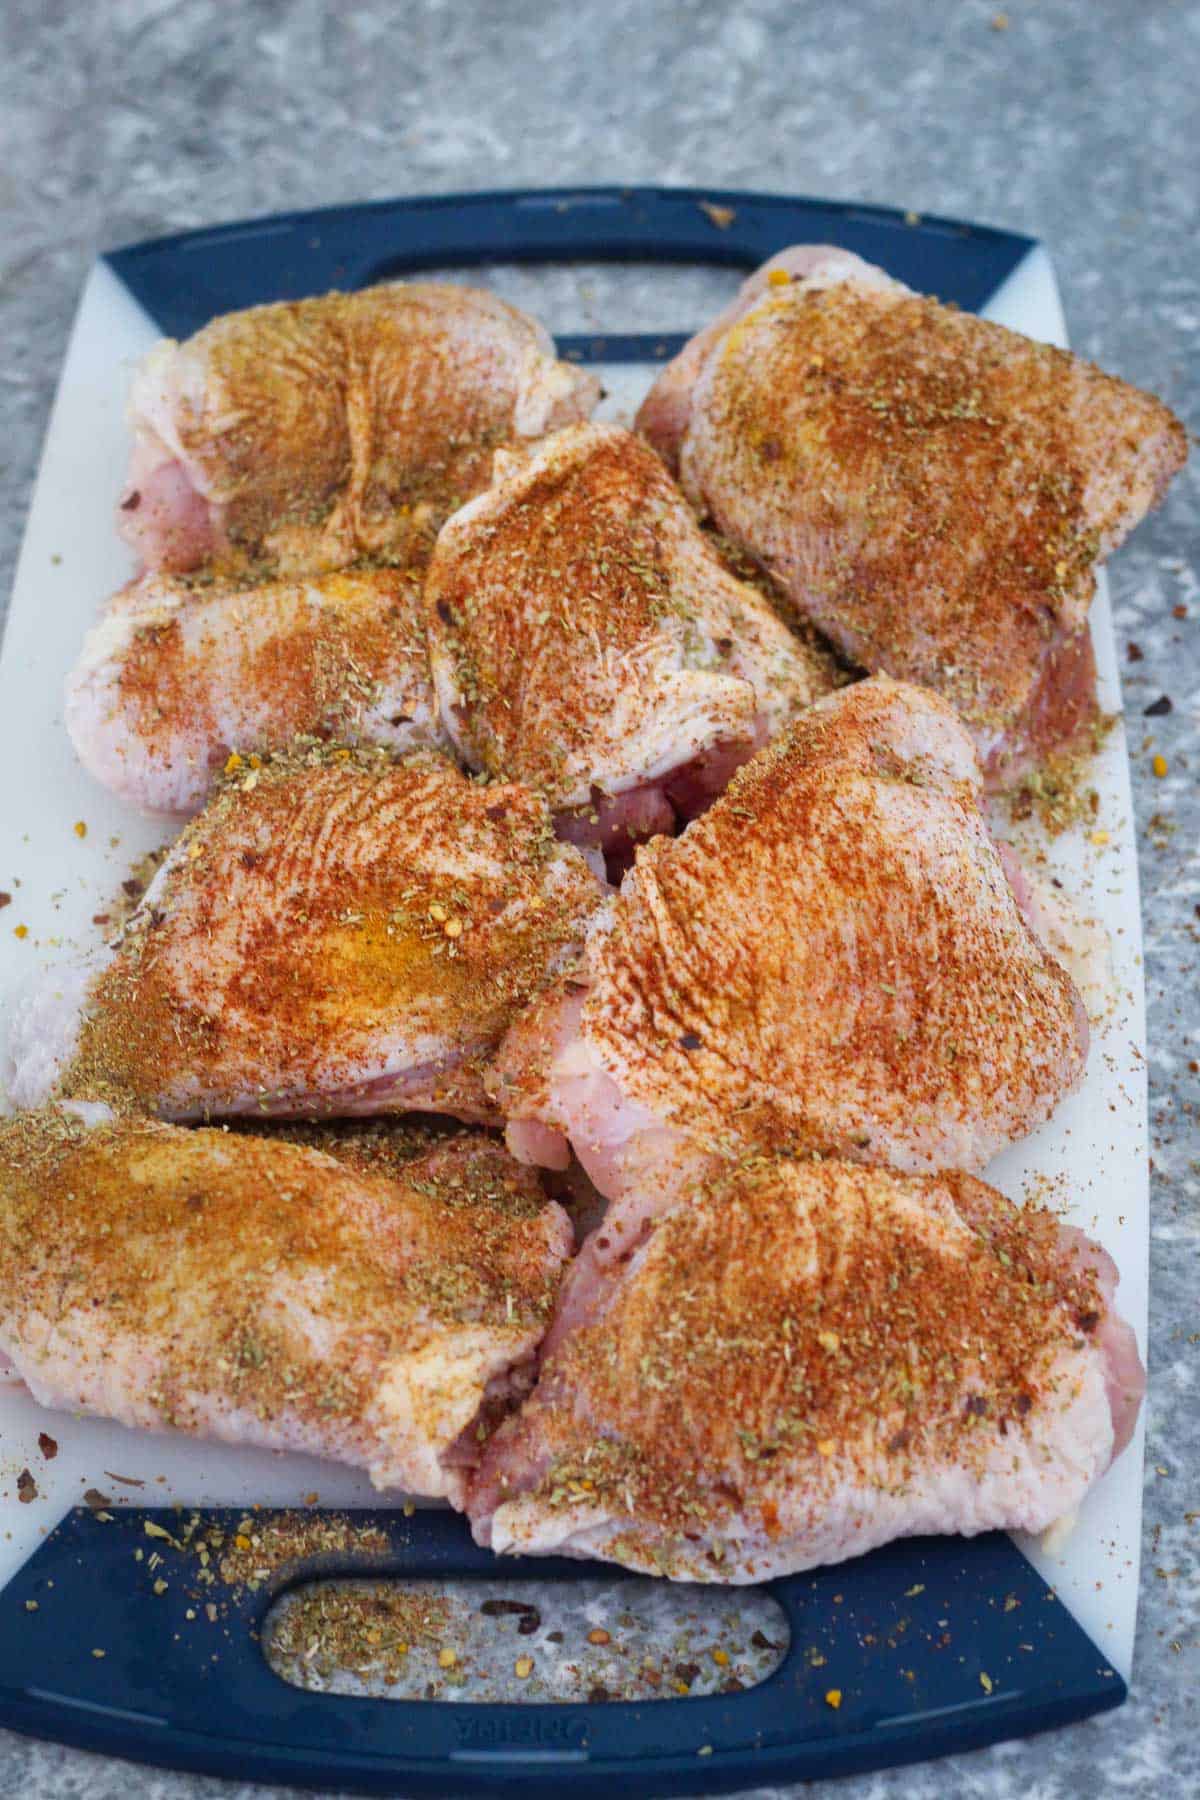 Seasoned chicken with the mix of spices. Chicken thighs are placed over a cutting board.